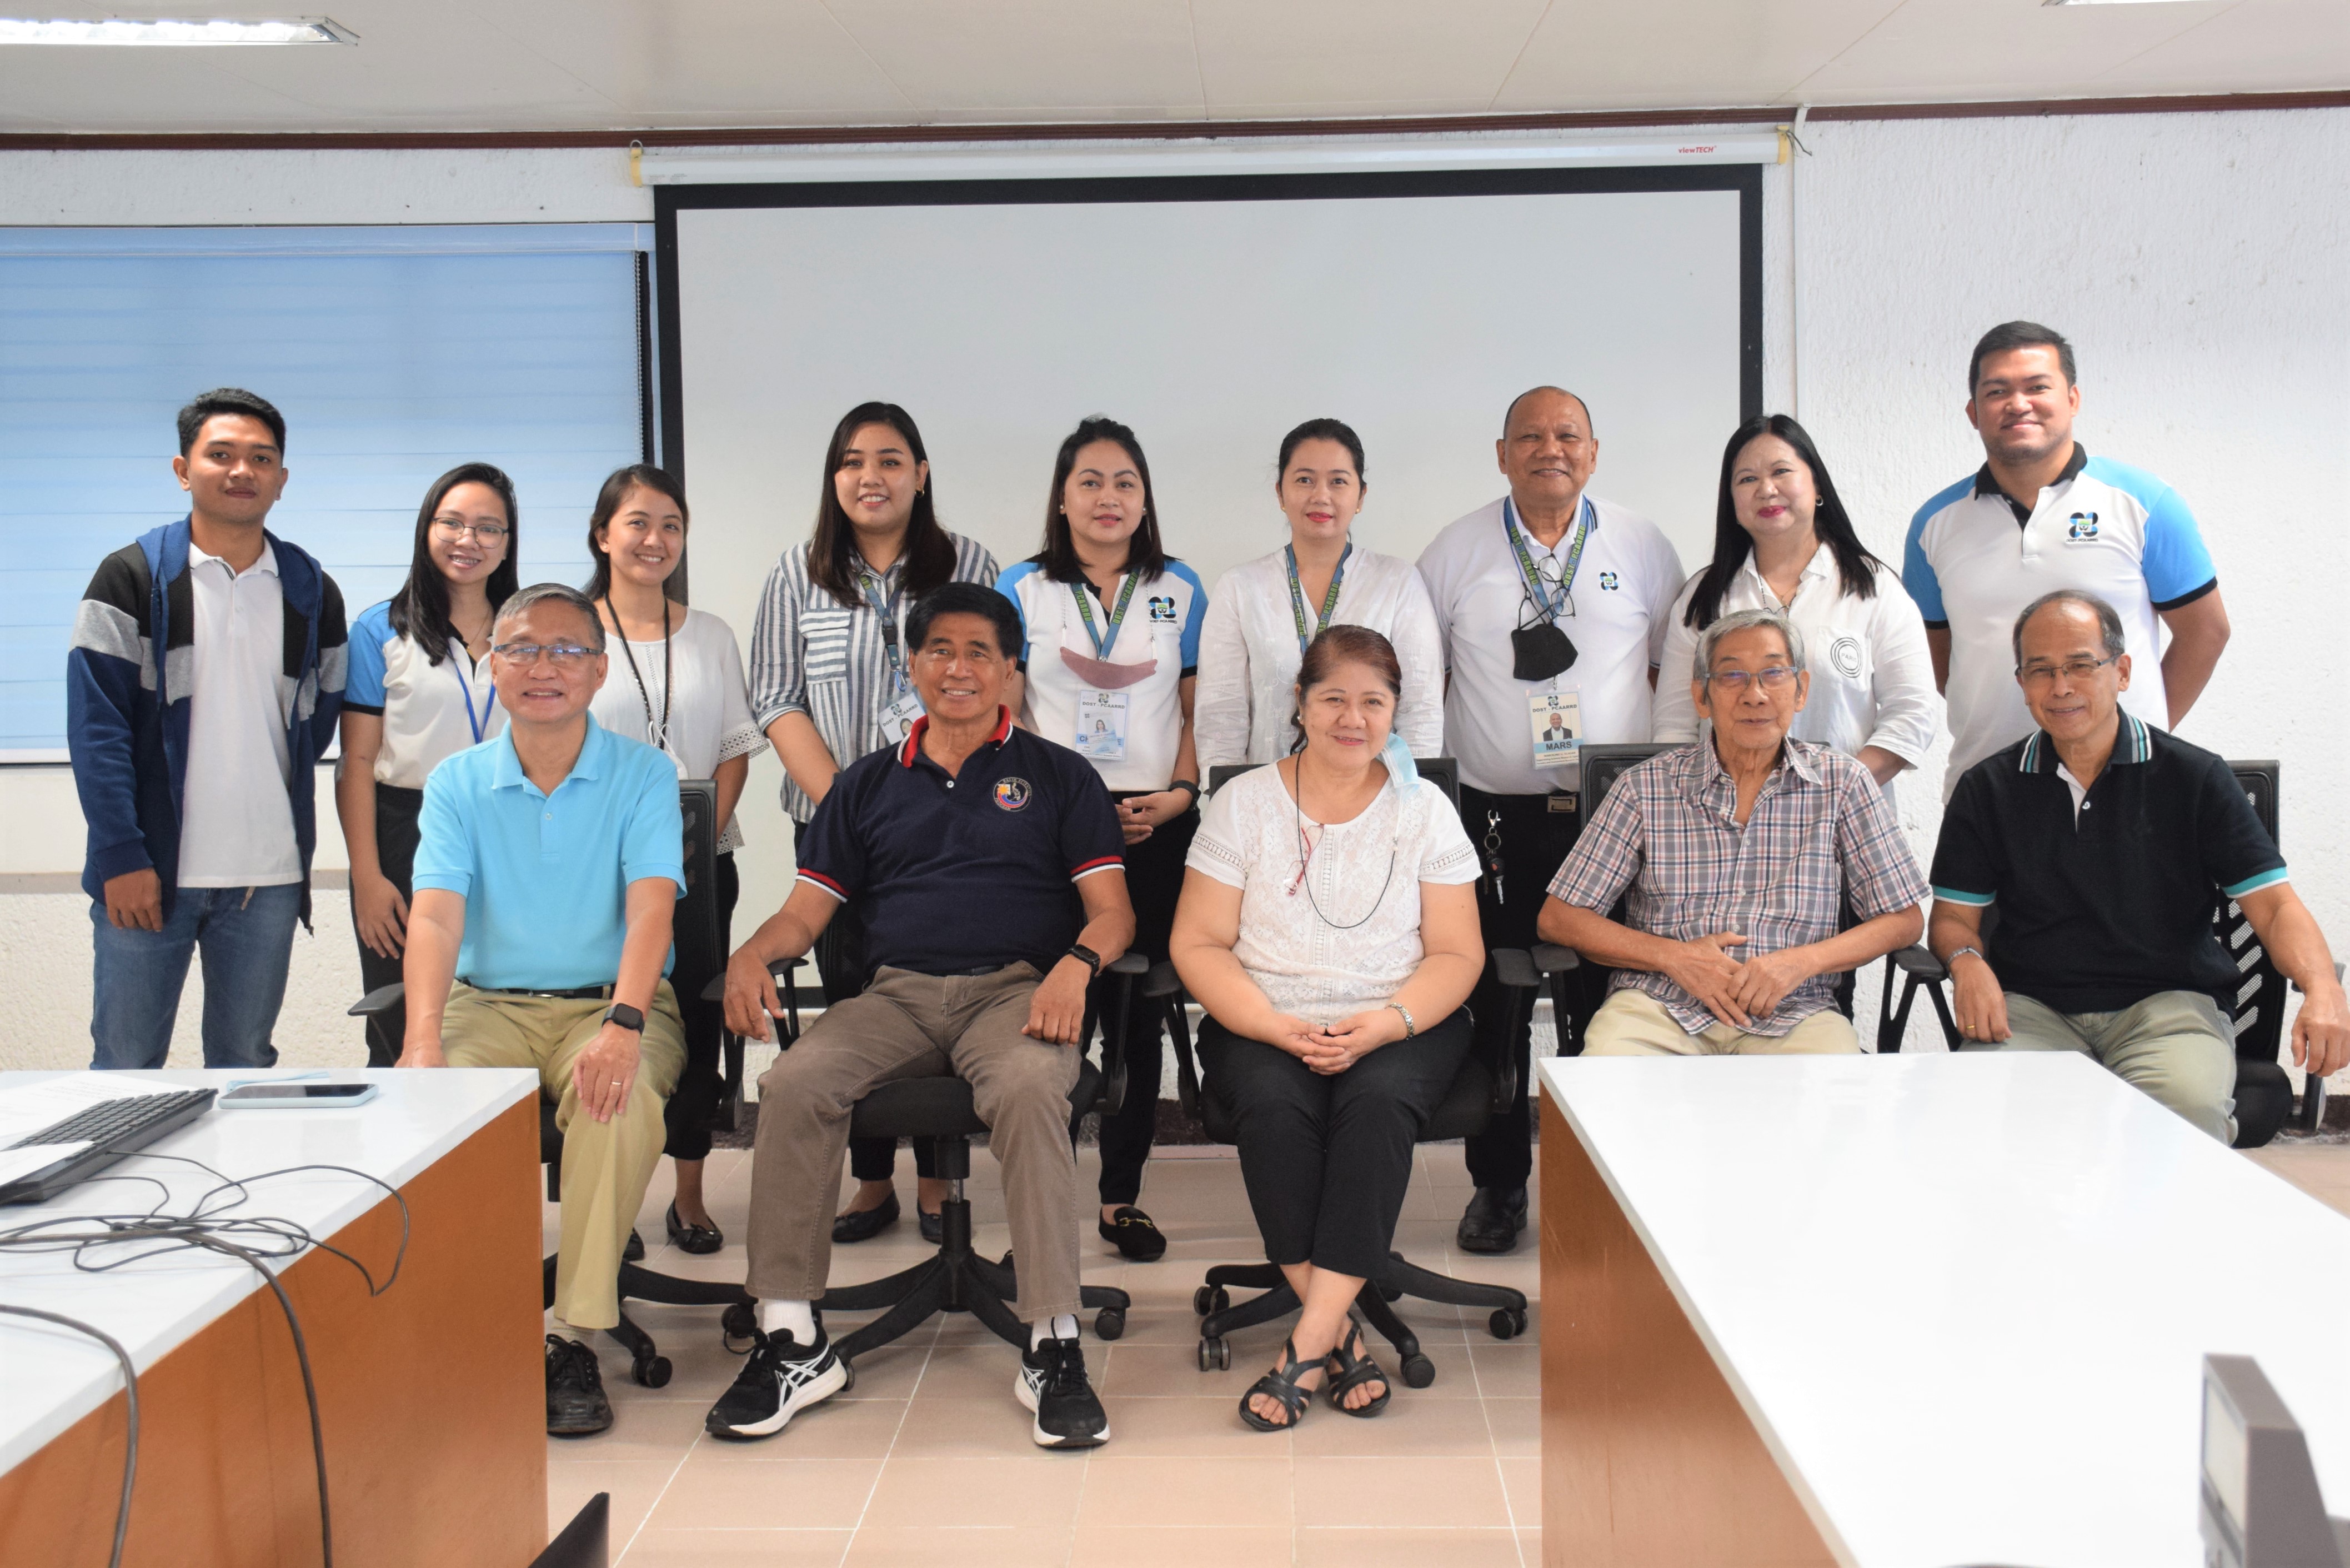 DOST-PCAARRD’s Forestry and Environment Research Division staff with industry experts Dr. Guillermo Mendoza, Dr. Ramon Razal, Dr. Florentino Tesoro, and Dr. Enrique Tolentino Jr.